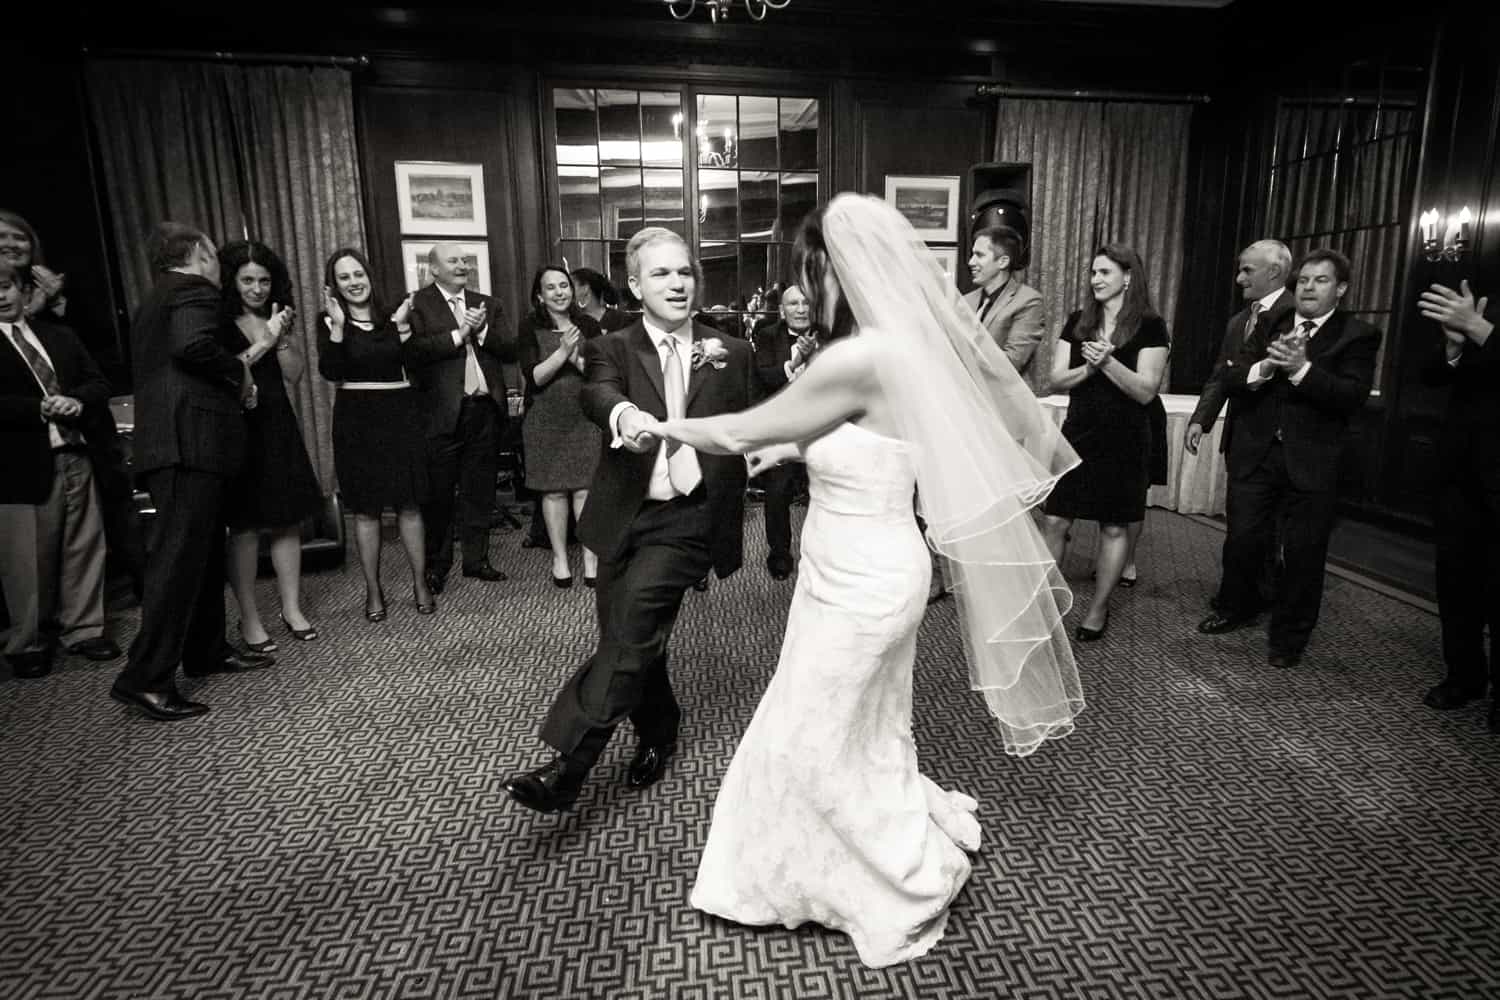 Bride and groom dancing in front of guests for article on the mysteries of photo editing